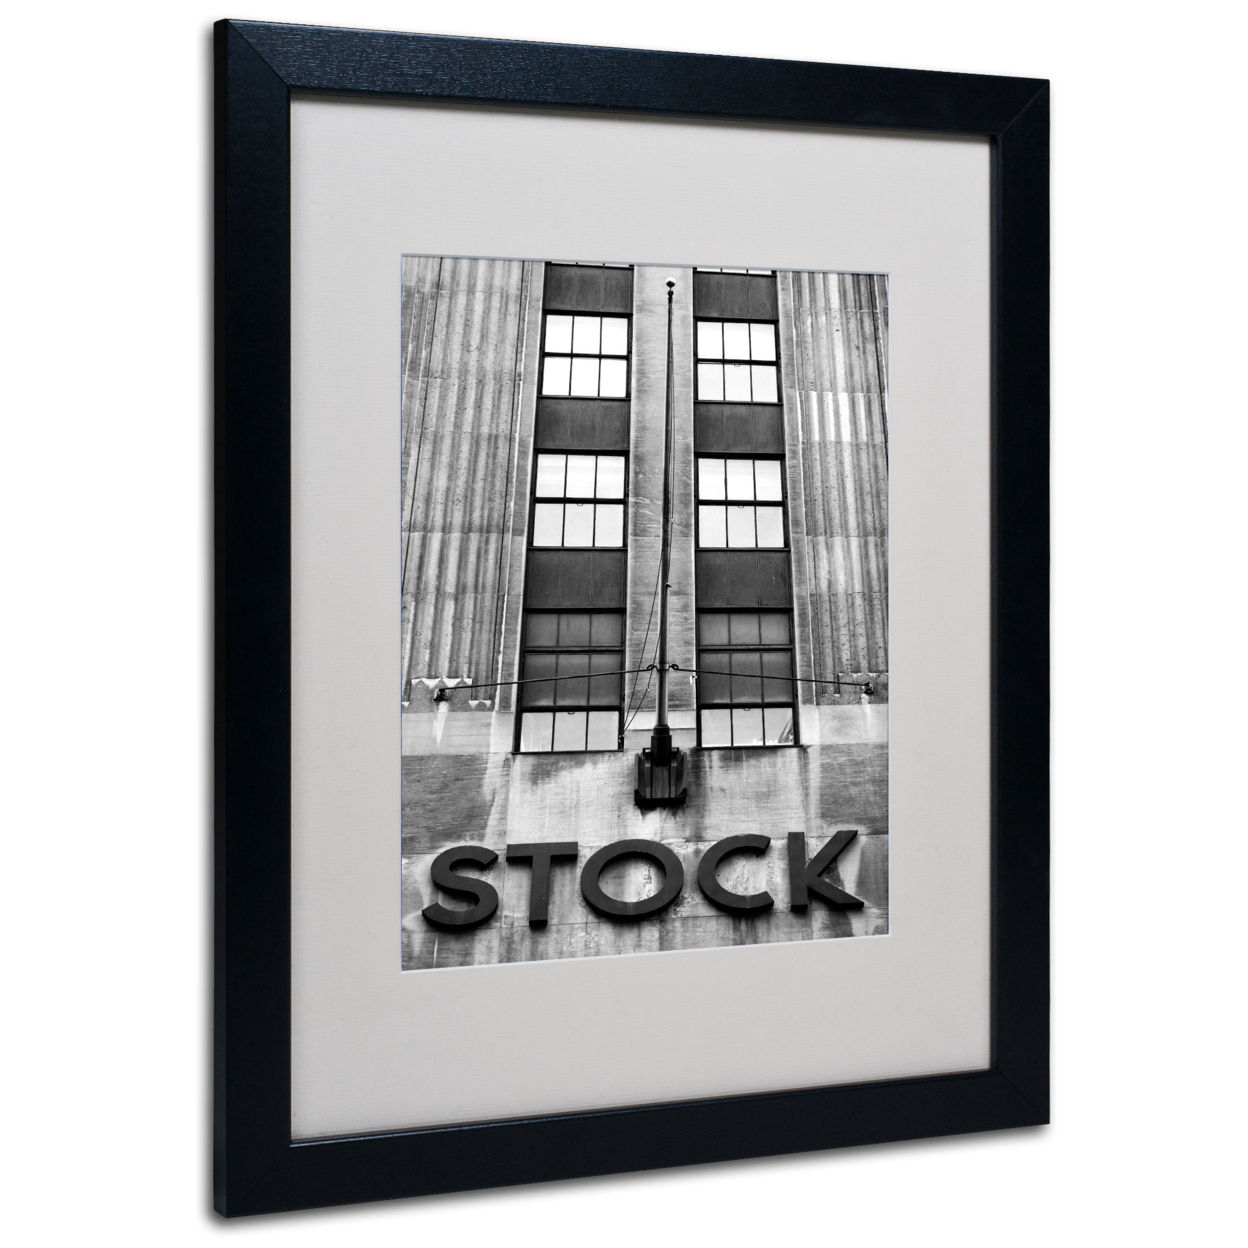 Yale Gurney 'Wall Street STOCK' Black Wooden Framed Art 18 X 22 Inches